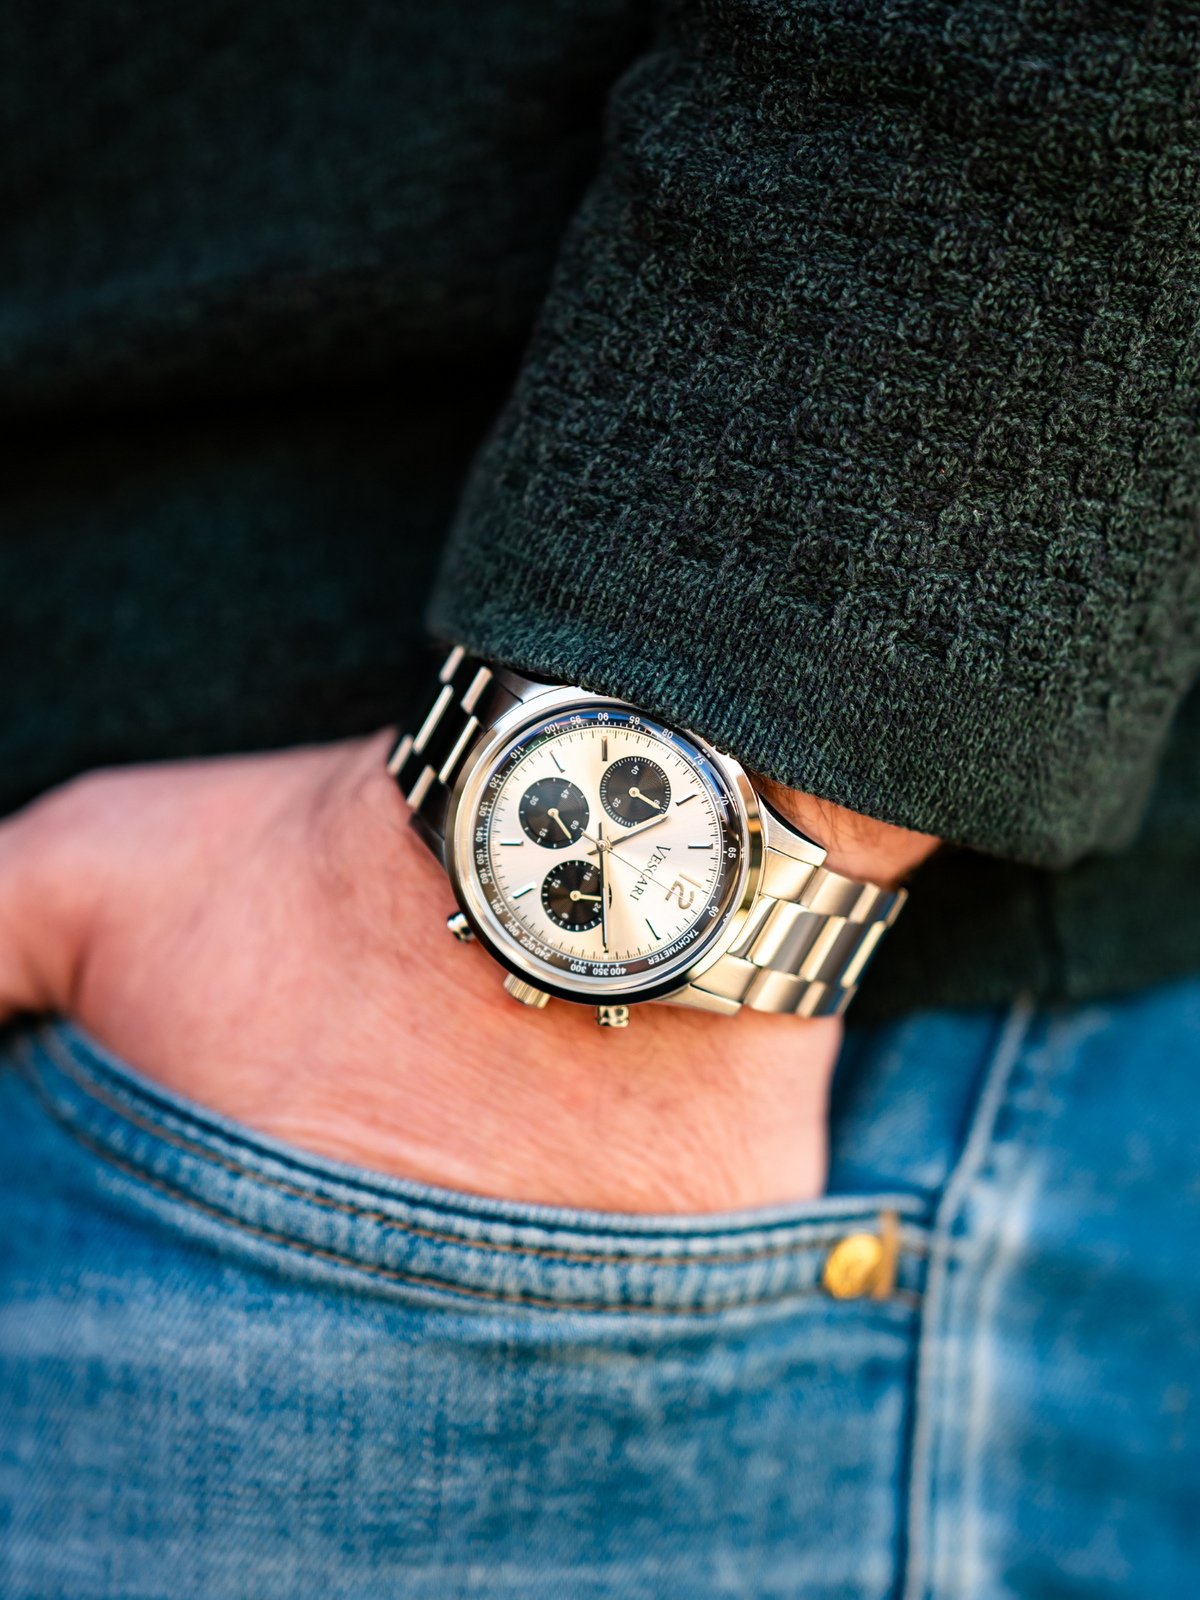 The Chestor 'Panda' Limited edition